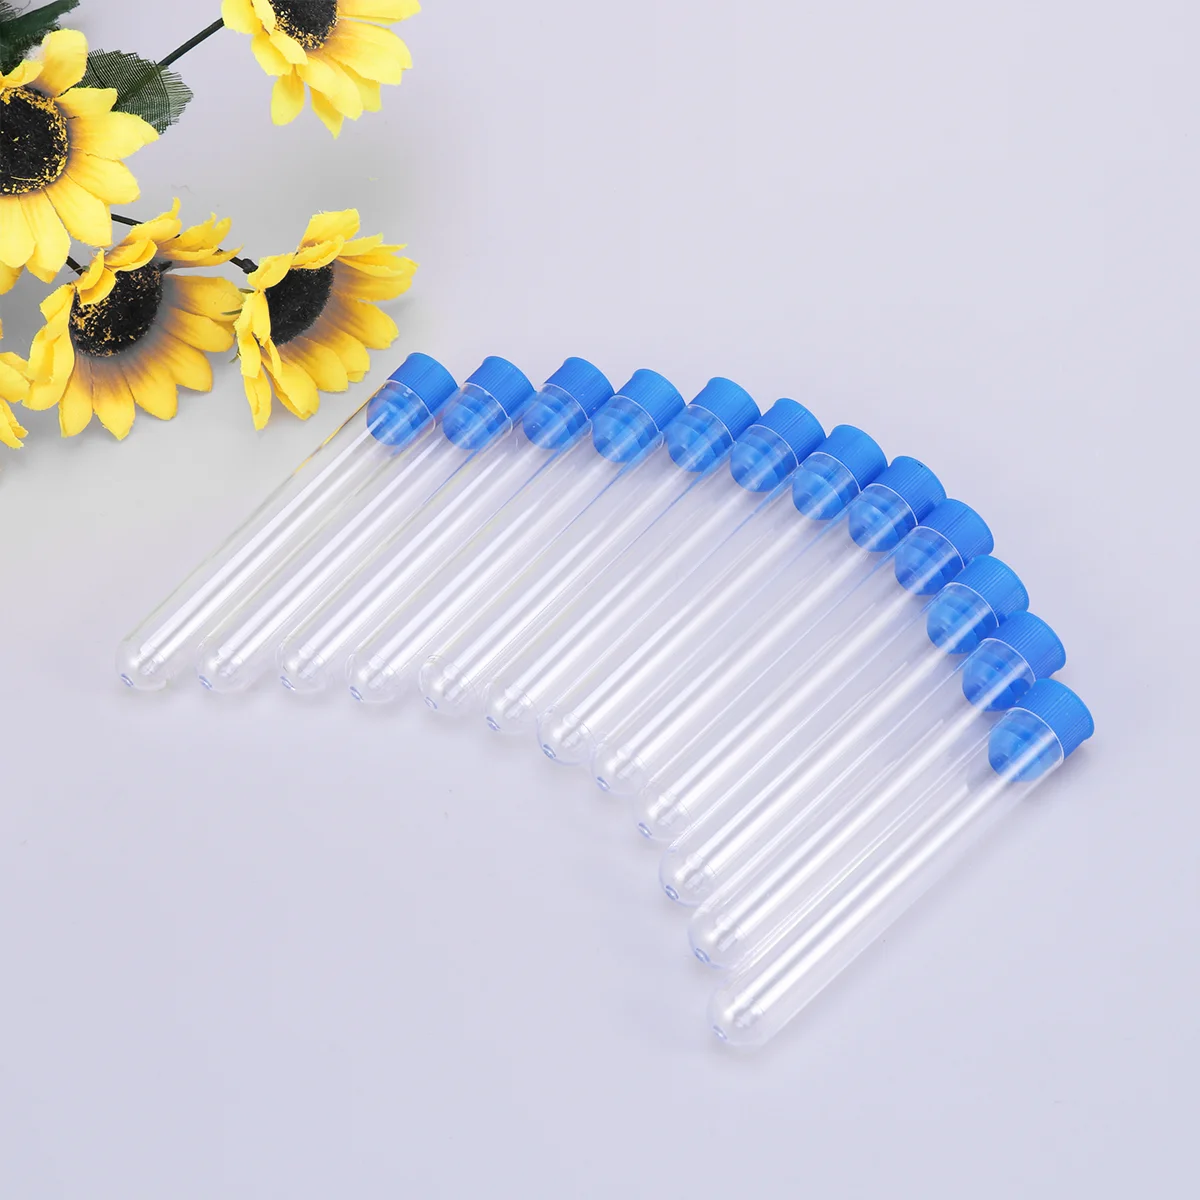 

12 Pcs/Pack Containers Lotion Bottle Plastic Tubes Lids Test Pipe Clear Tubing Small Bottles Souvenirs for souvenirs